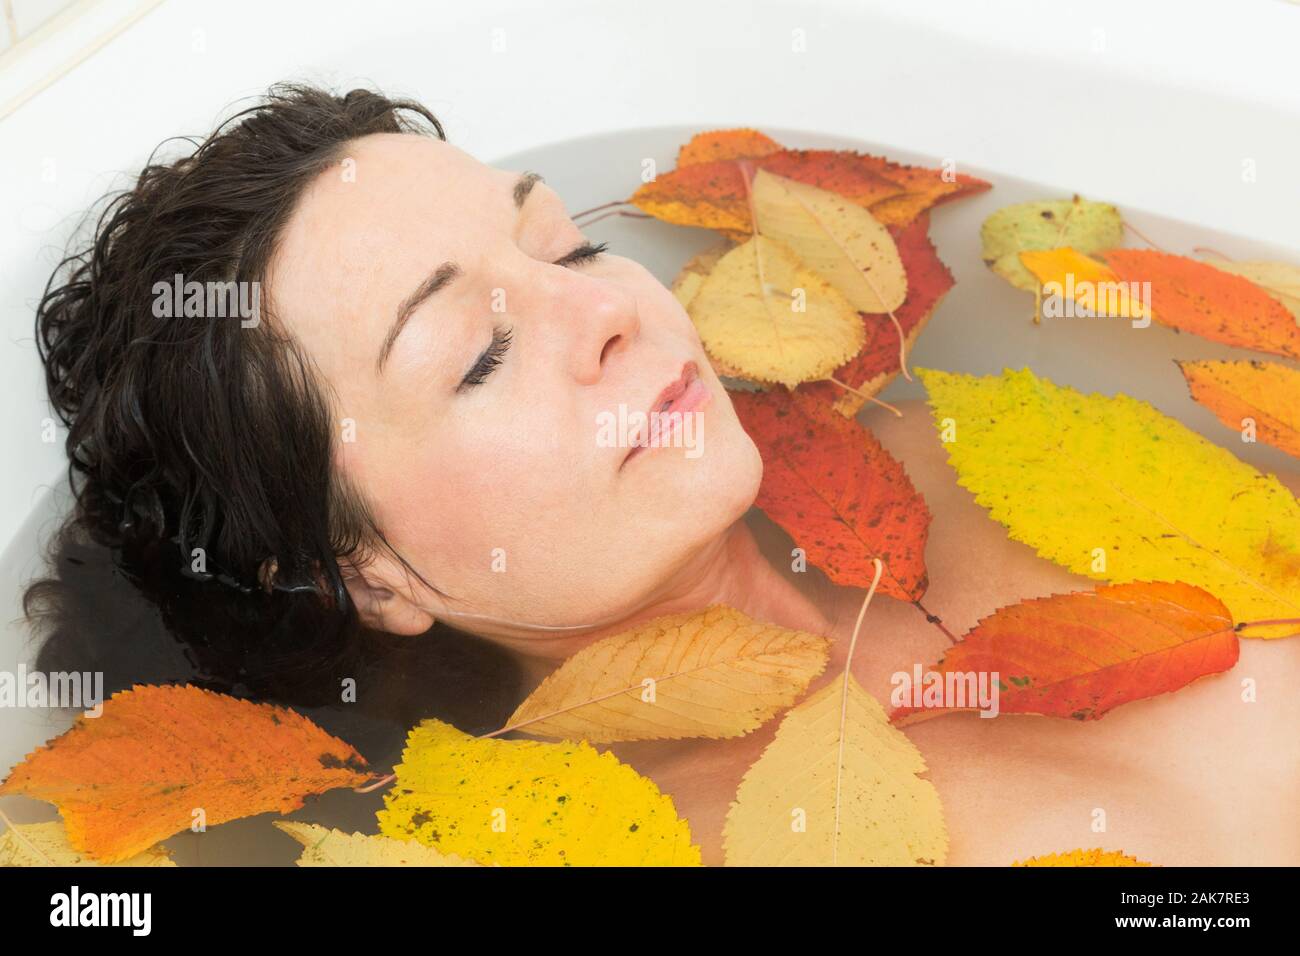 woman bathing with Autumn leaves Stock Photo